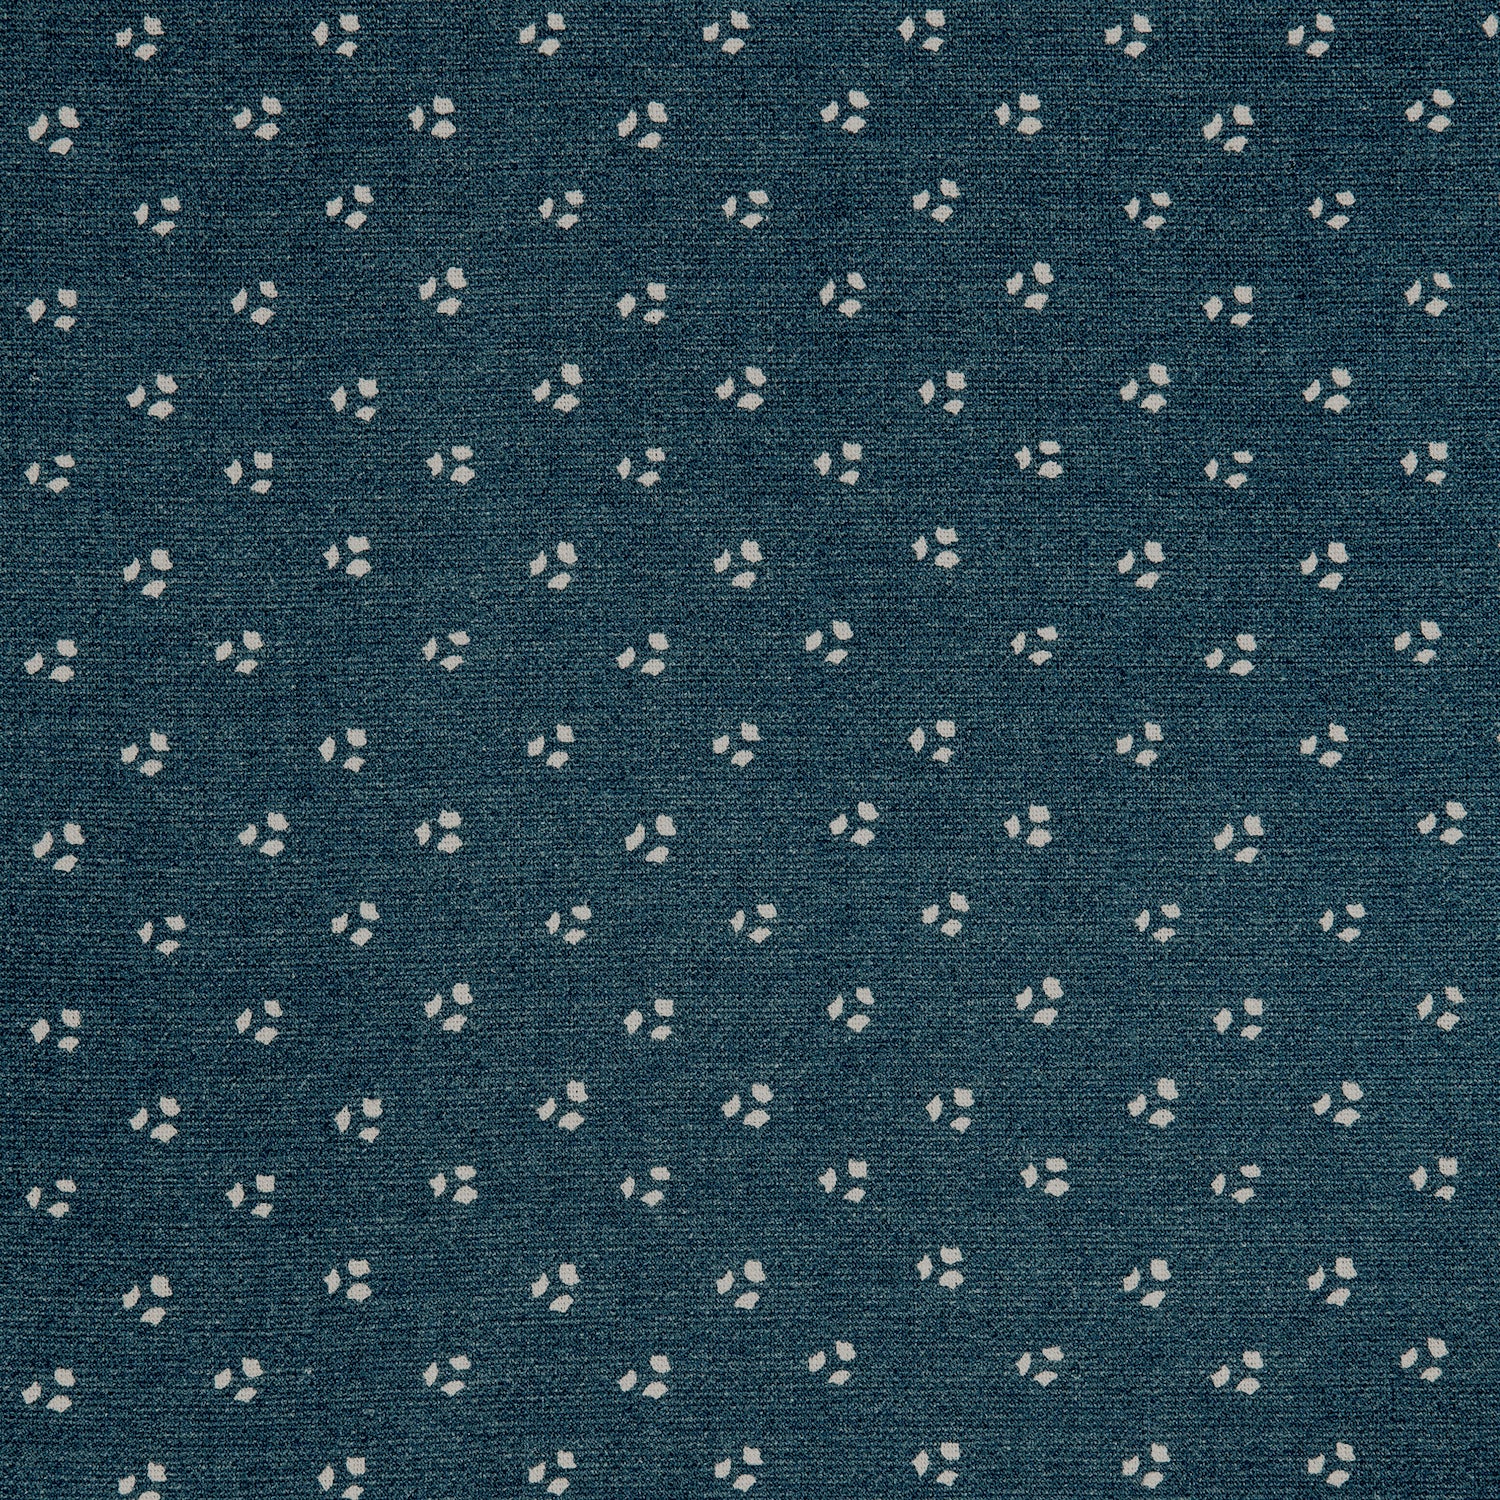 Detail of a linen fabric in a clustered dot pattern in cream on an indigo field.